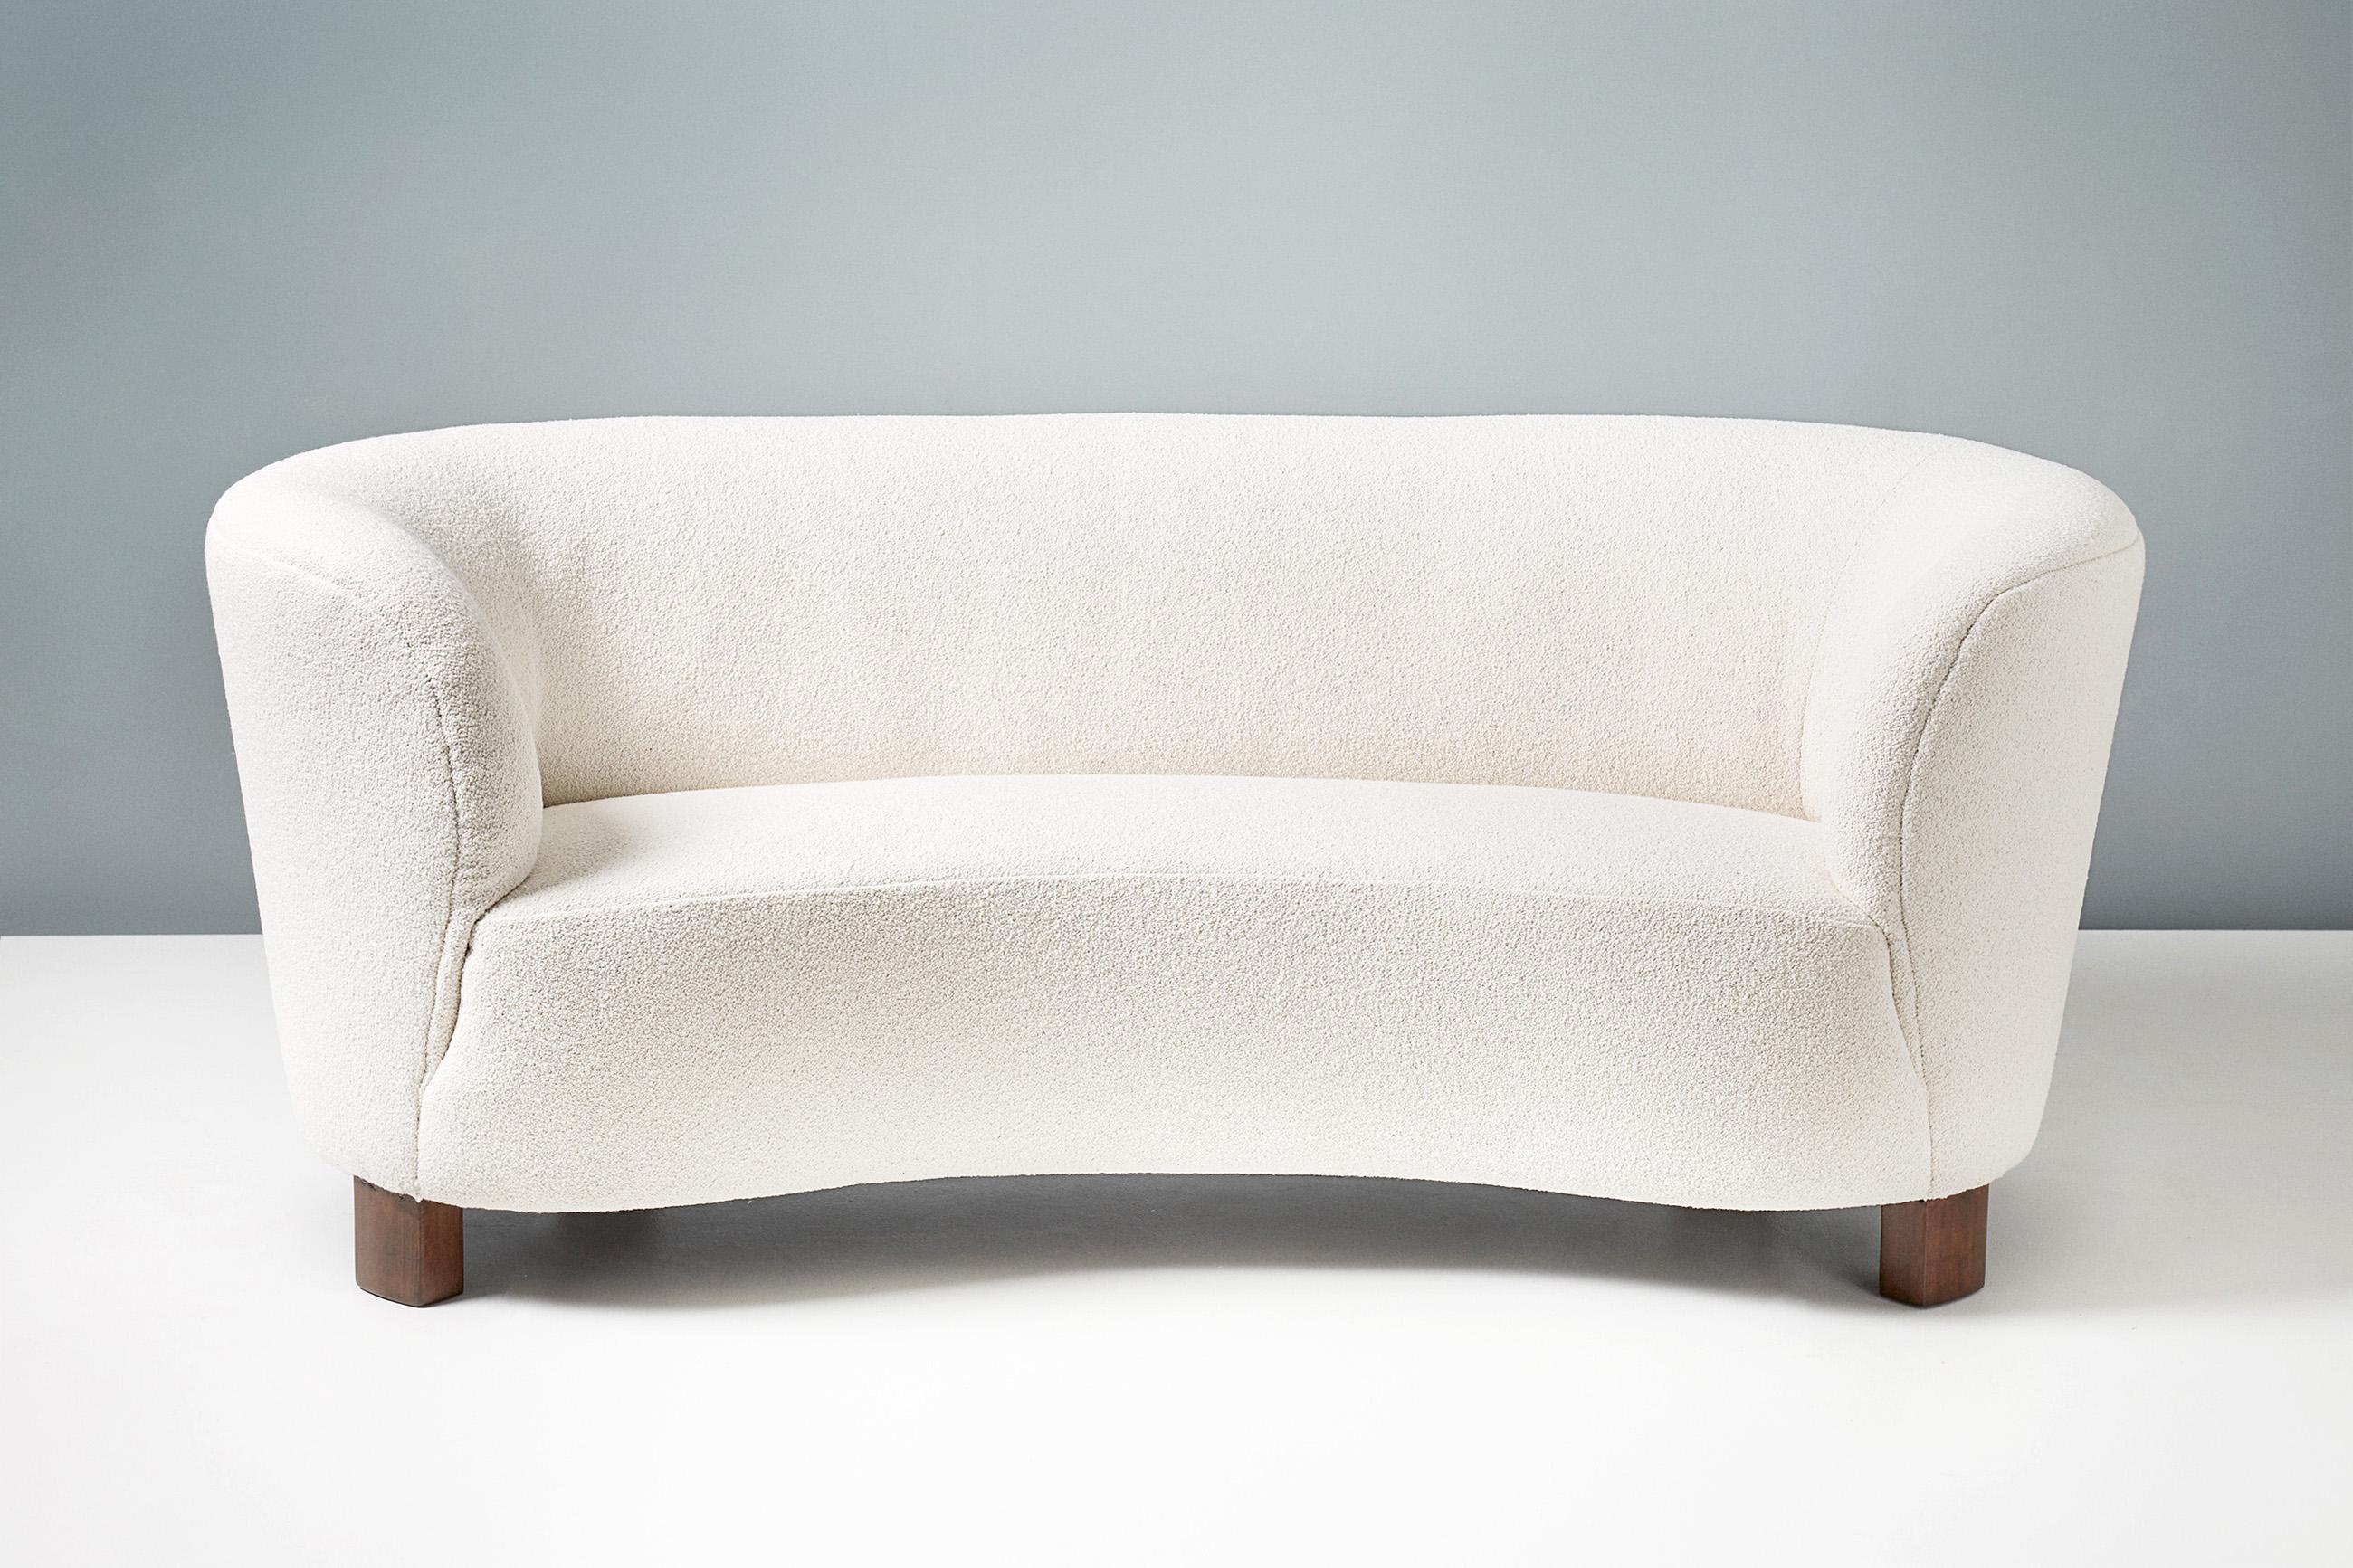 Classic curved sofa from master Danish cabinetmakers Slagelse Mobelvaerk, produced in Denmark circa 1940s. Oiled and stained, patinated oak legs with new off-white cotton-wool mix boucle upholstery from Chase Erwin, UK.